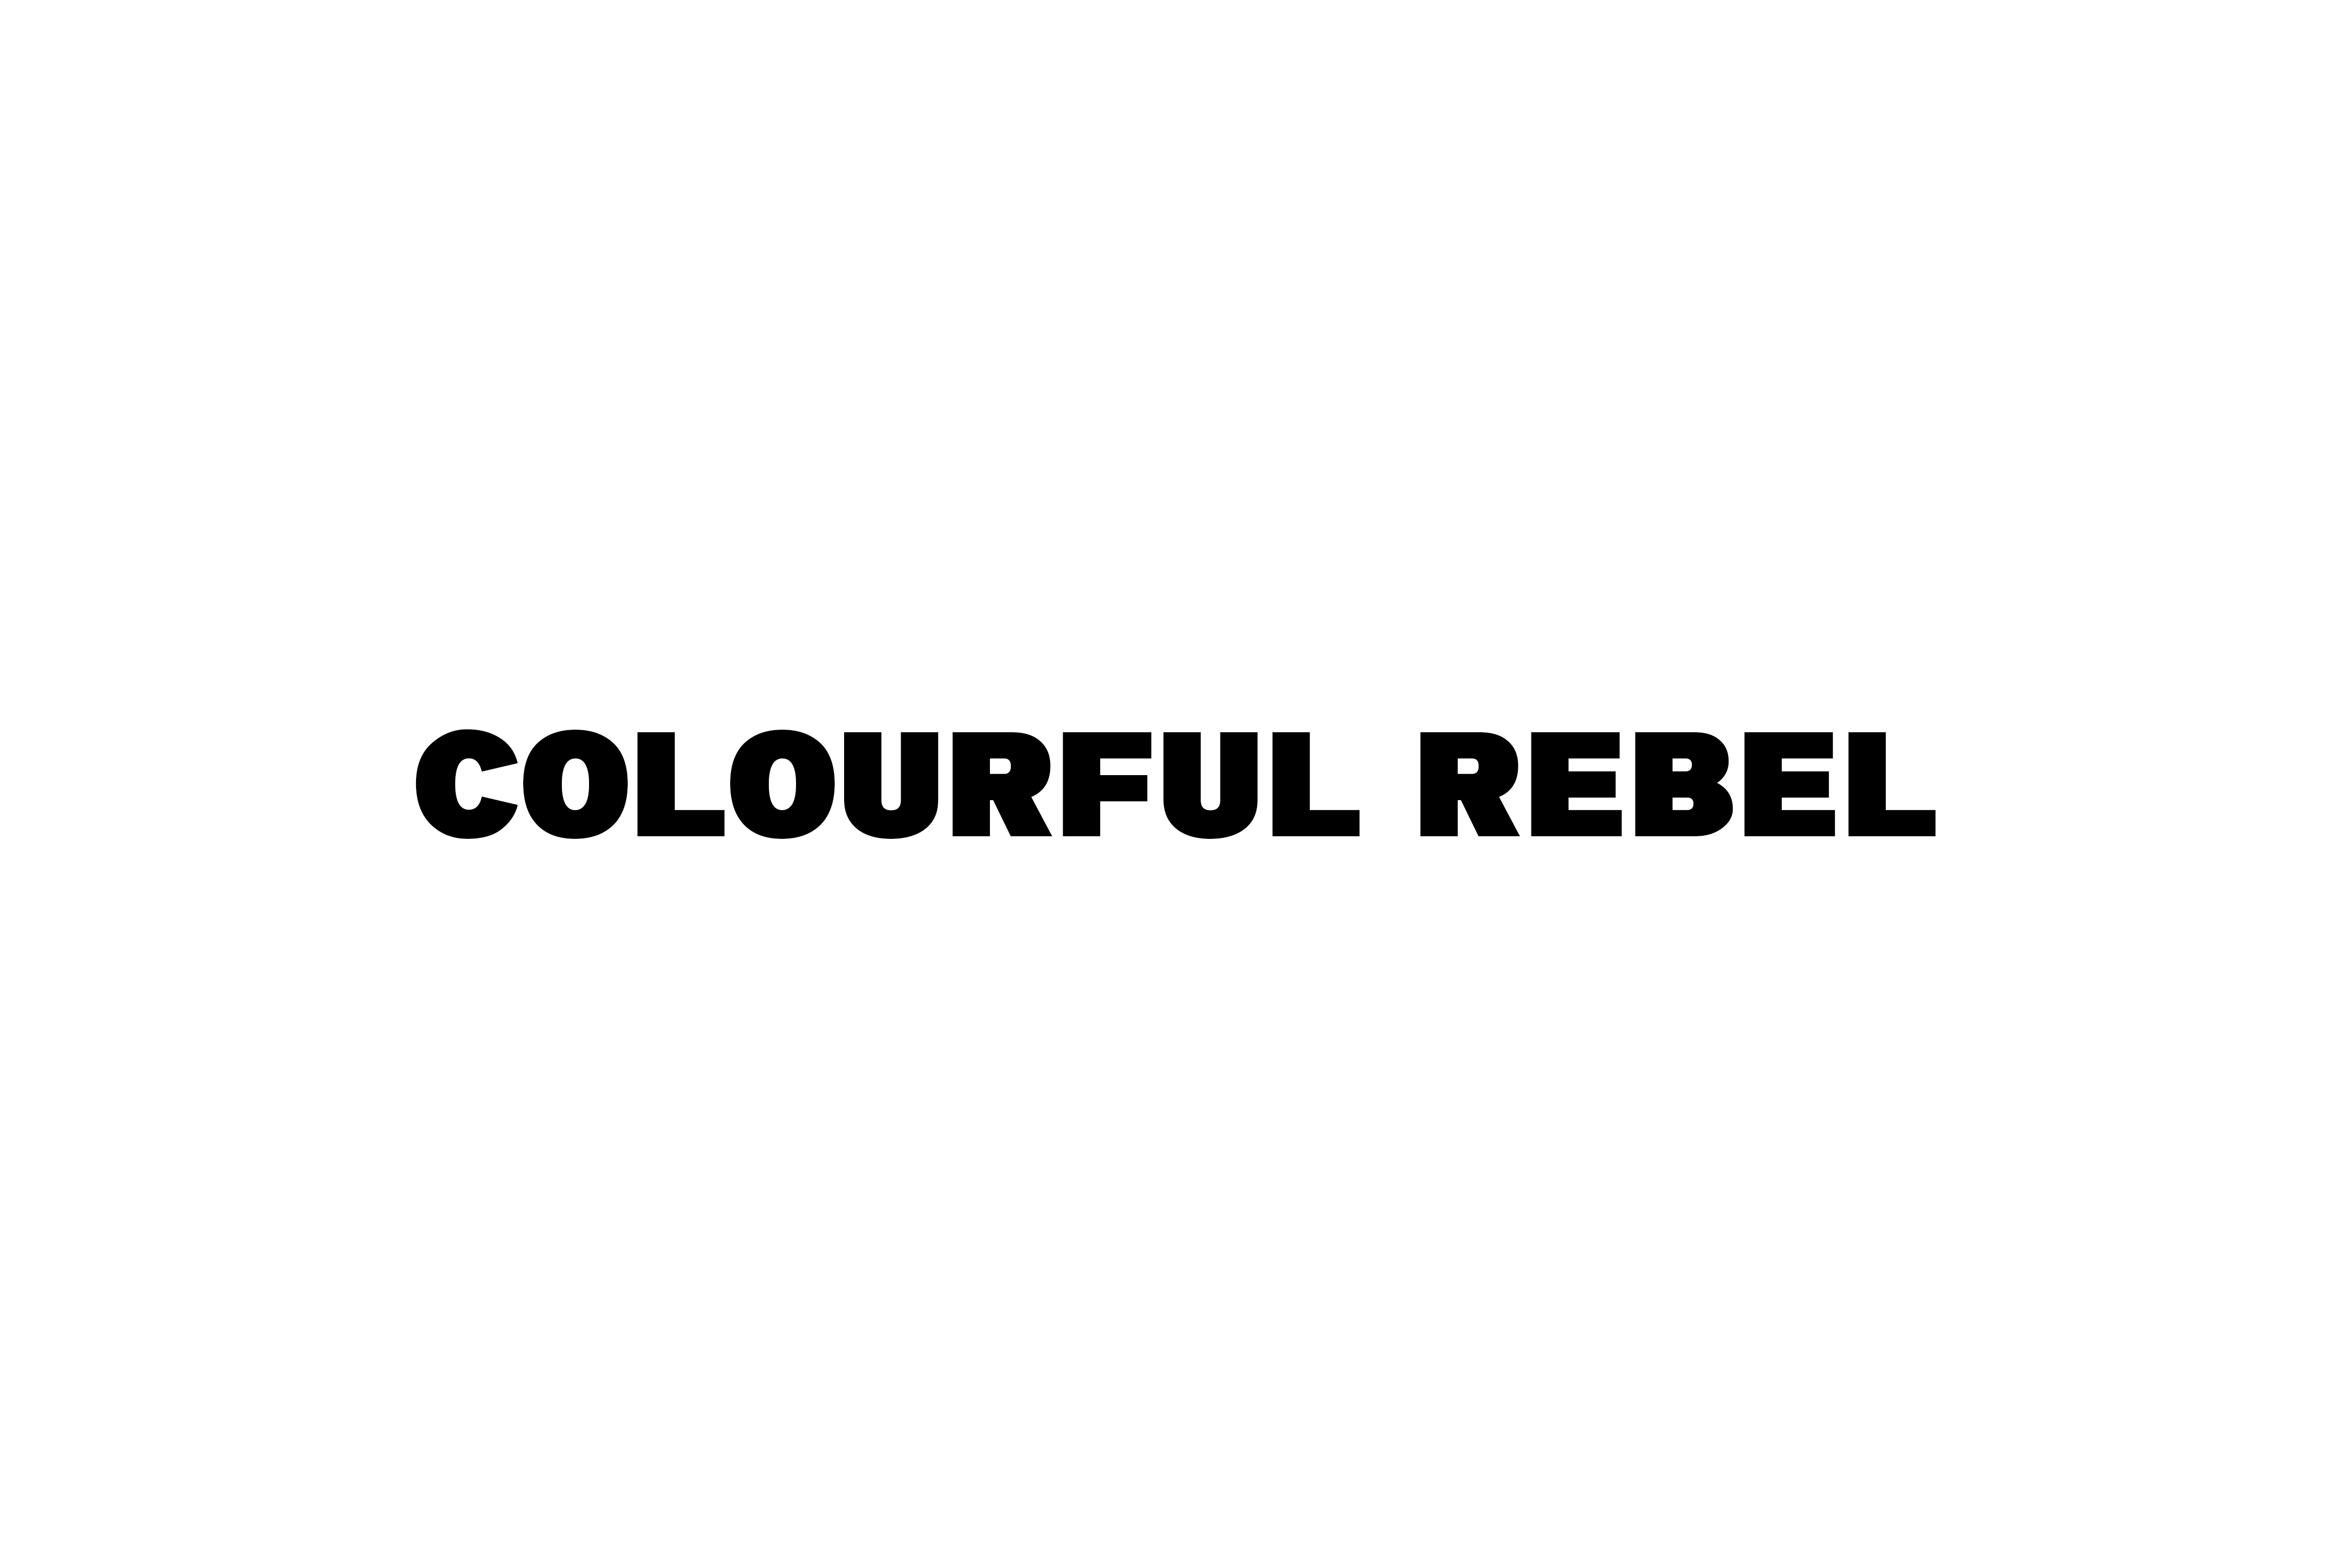 Shop - Colourful rebel in the lingerie industrie